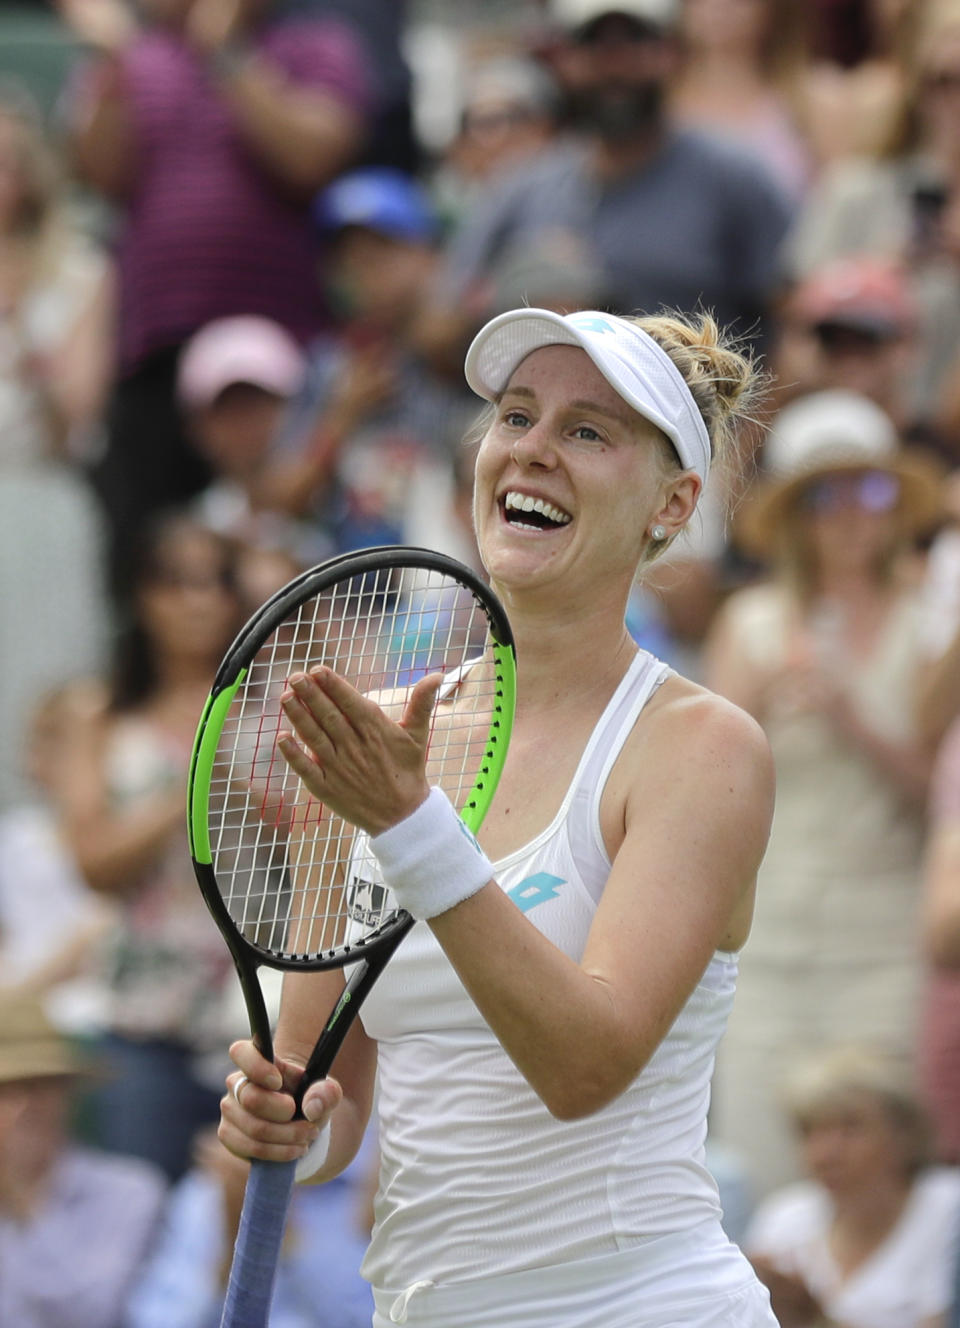 United States' Alison Riske celebrates defeating Australia's Ashleigh Barty in a women's singles match during day seven of the Wimbledon Tennis Championships in London, Monday, July 8, 2019. (AP Photo/Ben Curtis)